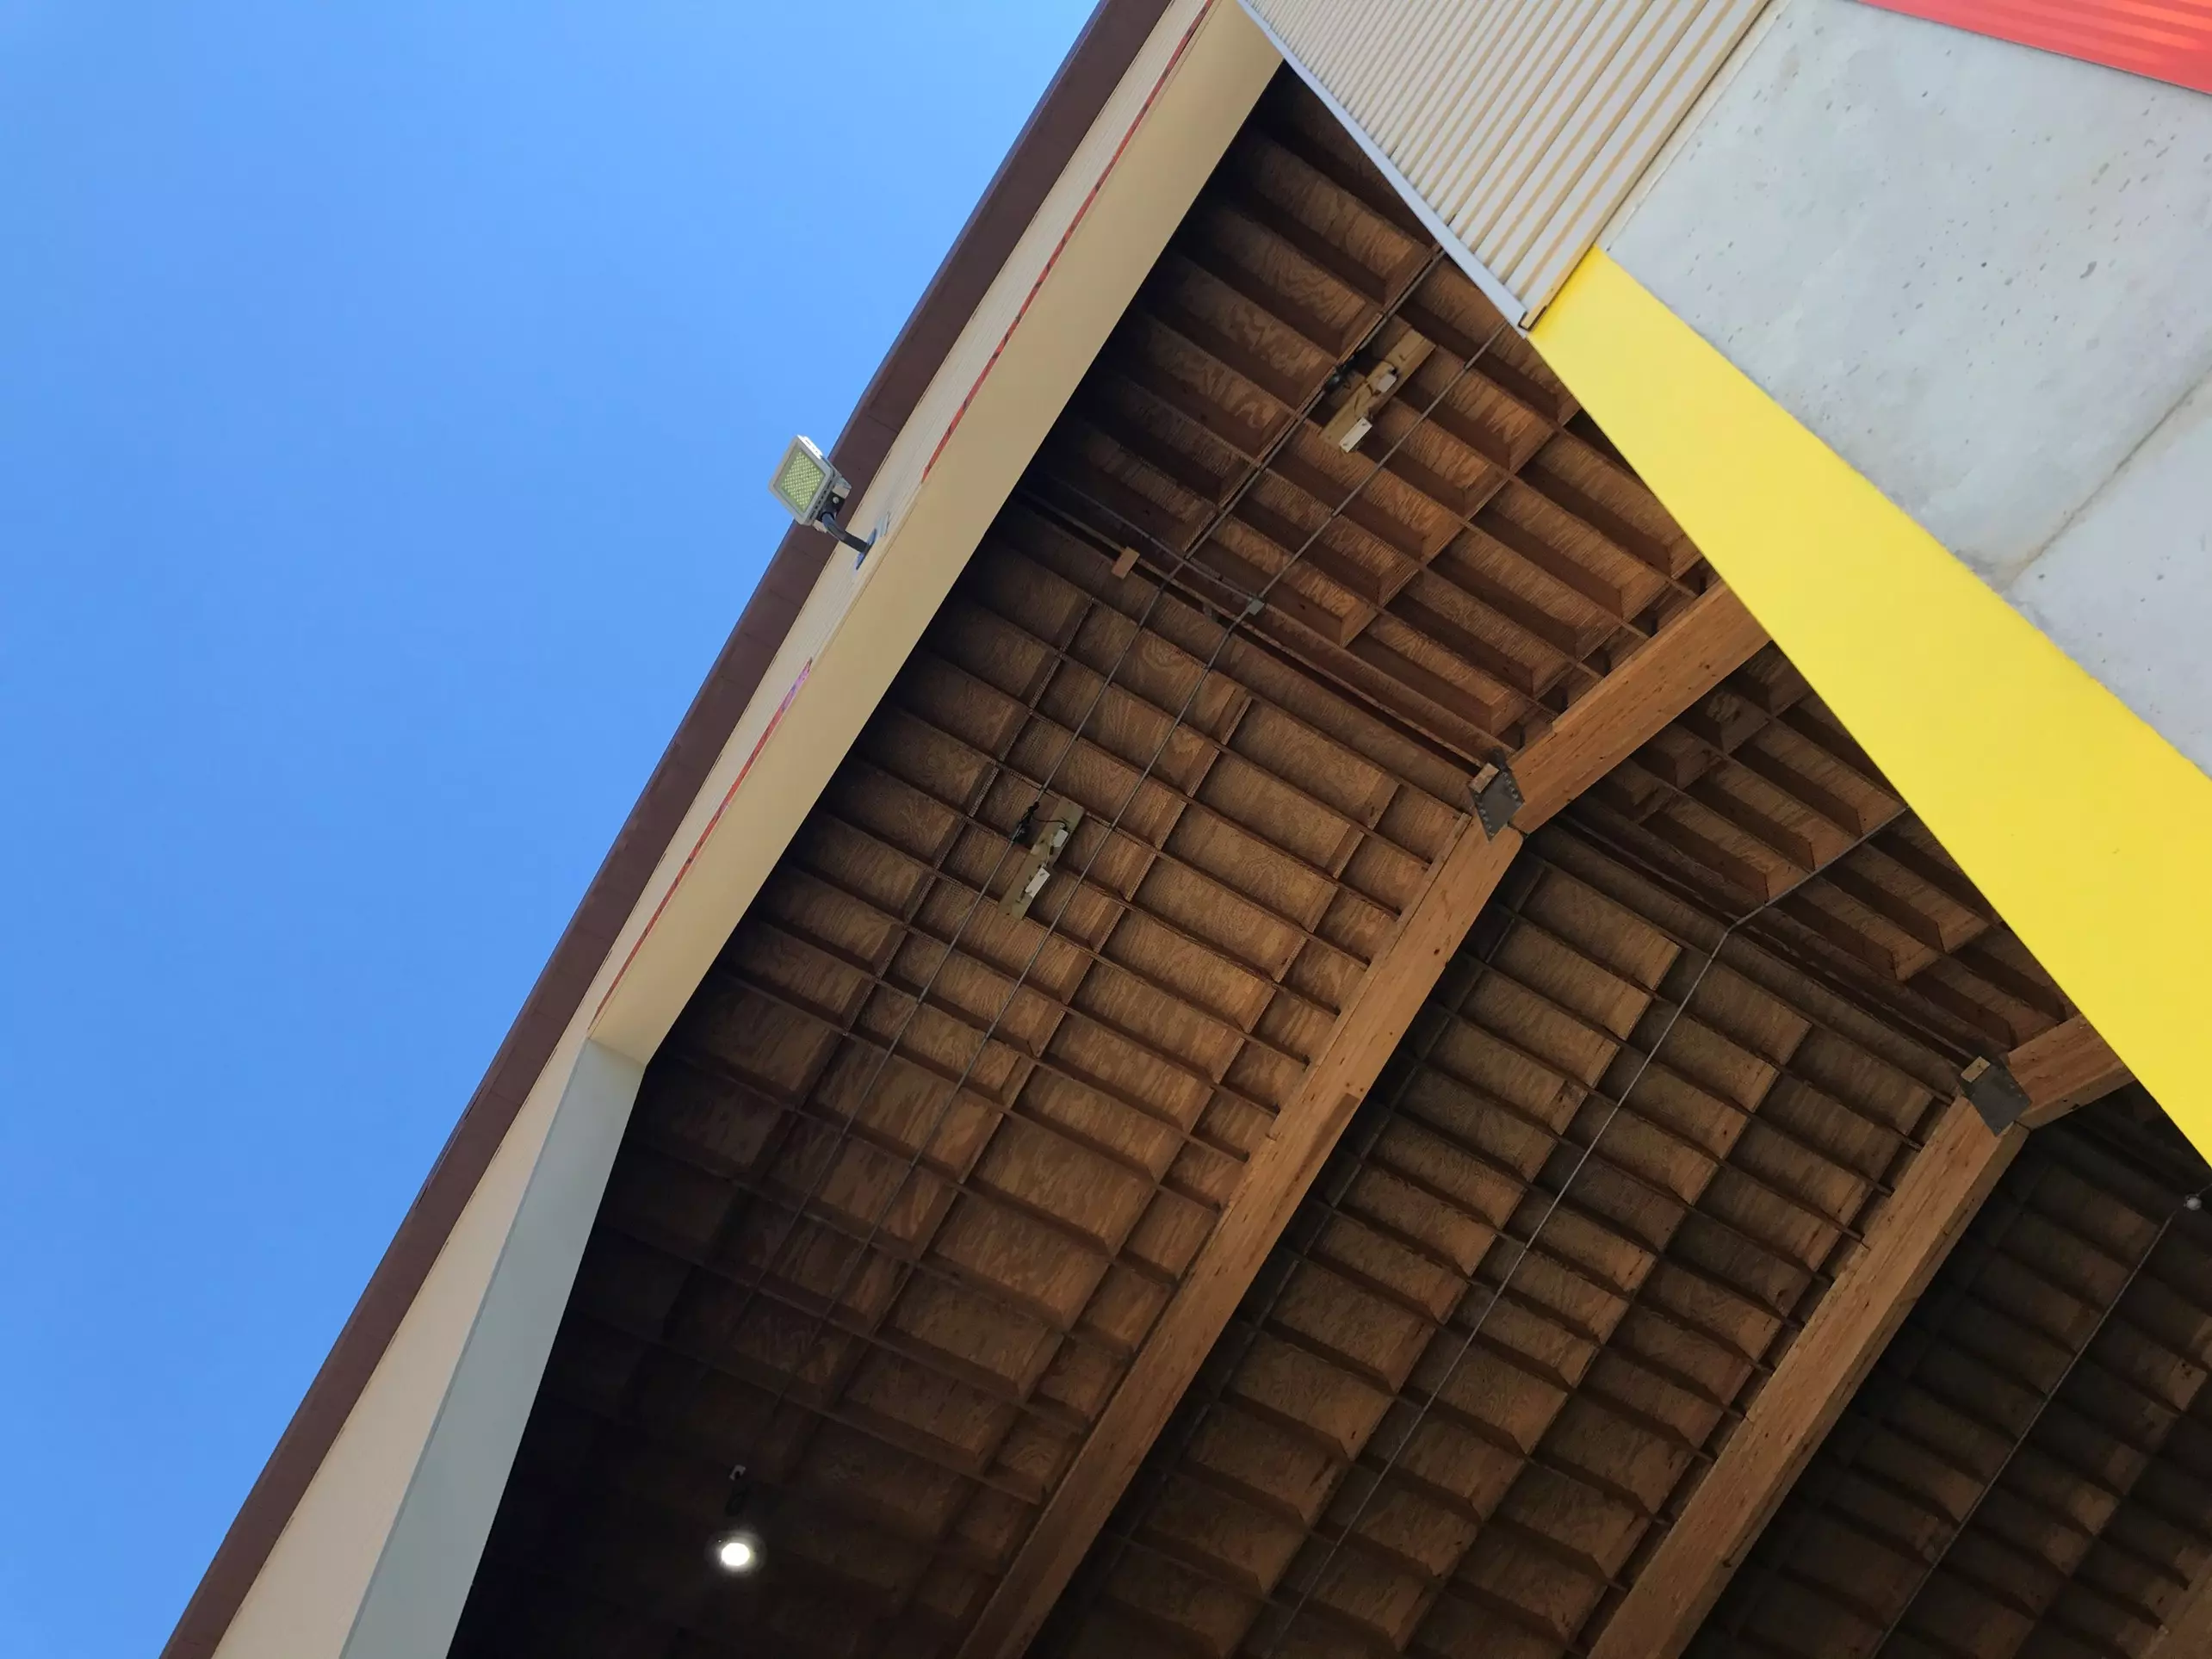 An image showing the interior of the wooden roof of a rock salt stockpile shed, with a view of the blue sky above the building.